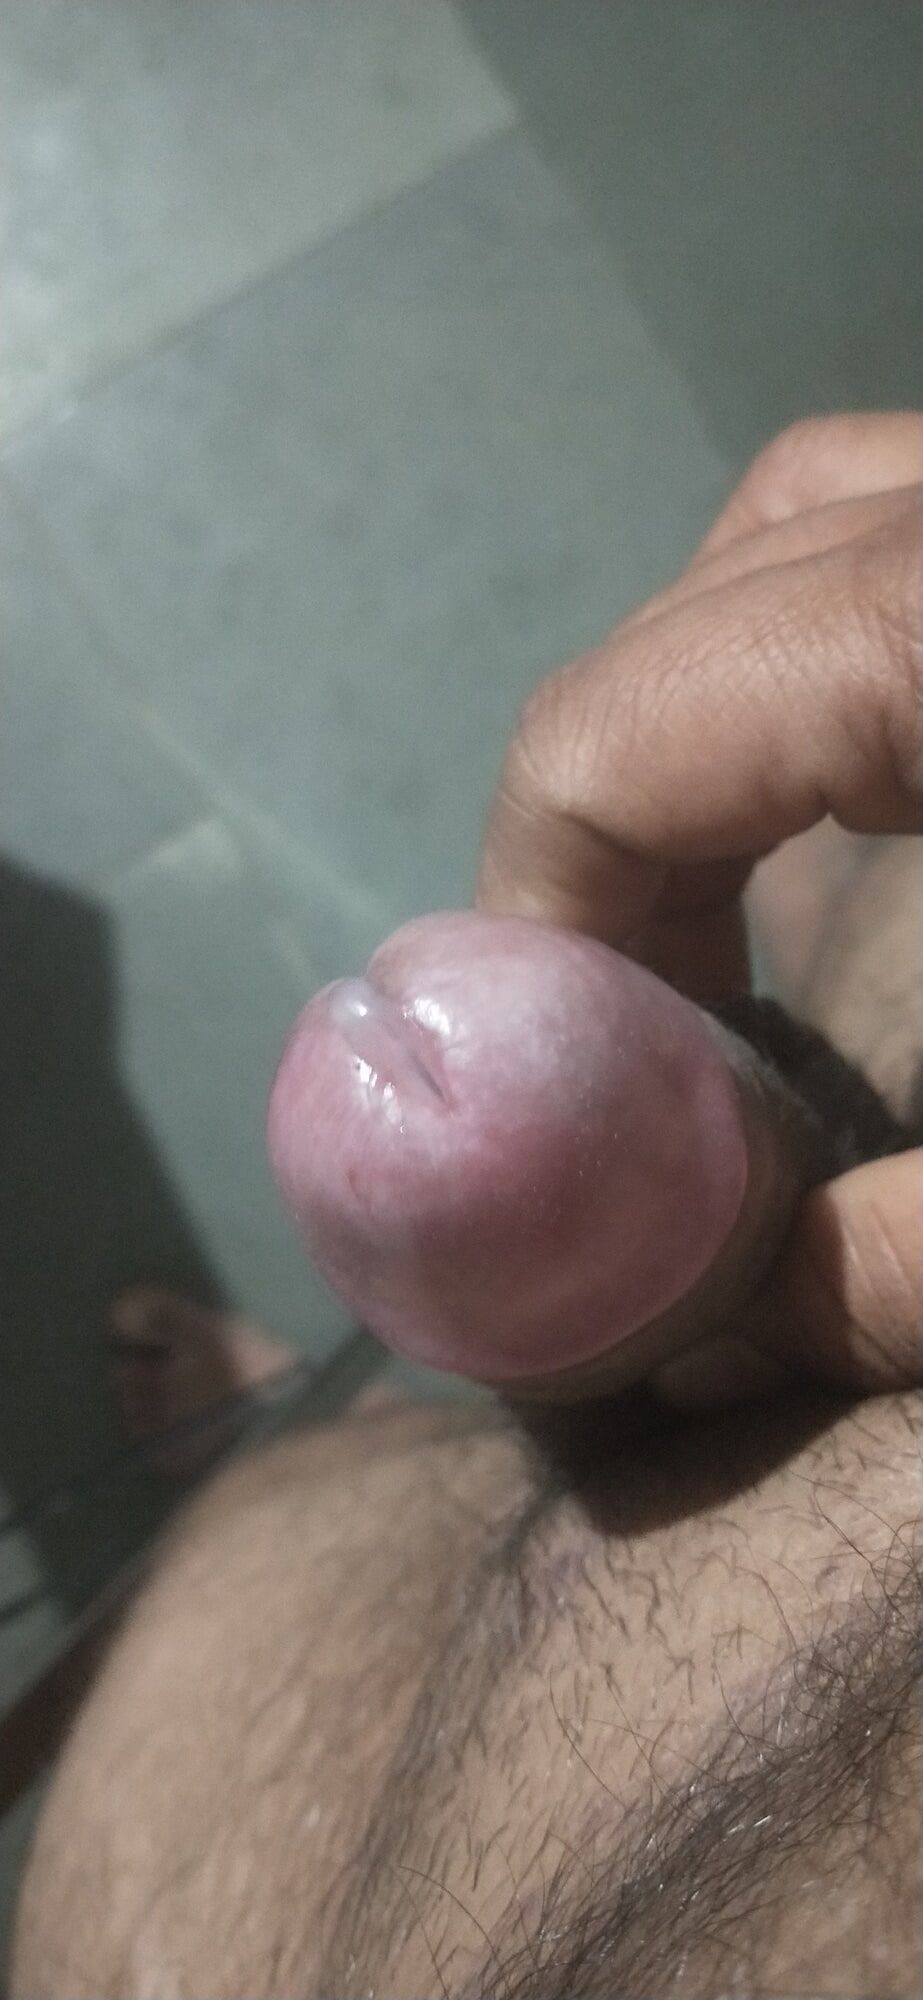 After sex penis pic